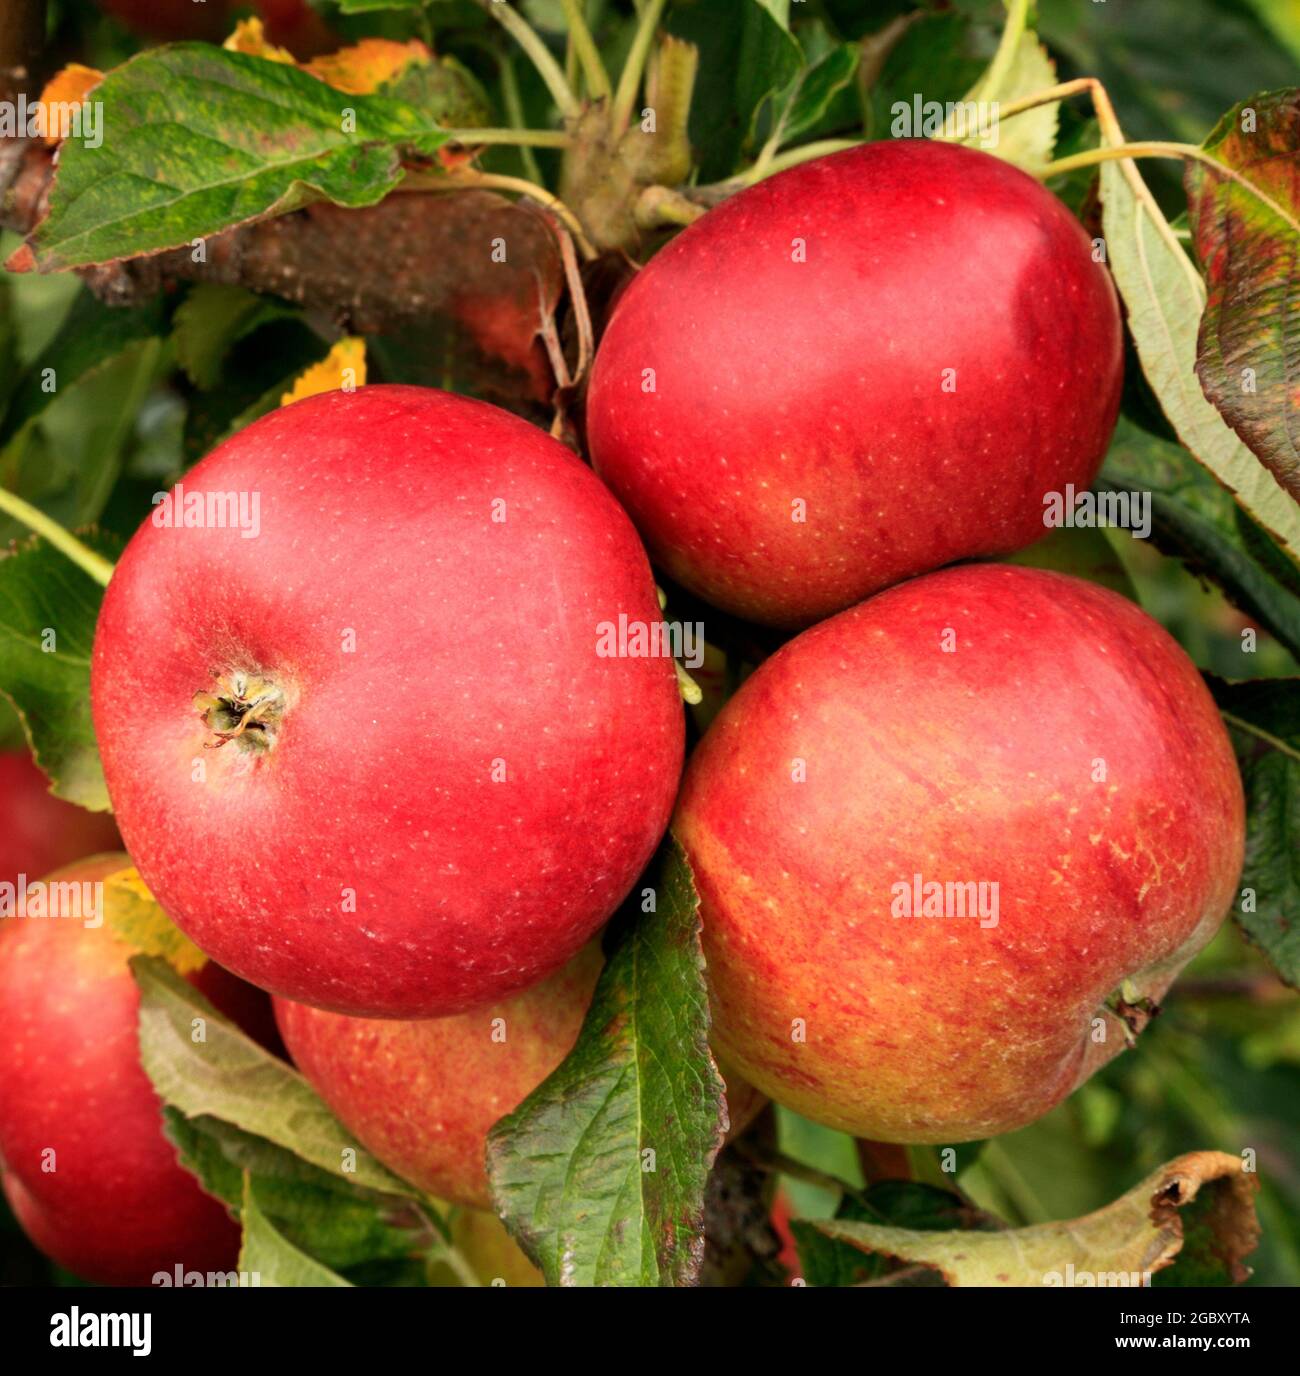 Apple 'Red Miller', growing on tree, malus domestica, apples, fruit Stock Photo